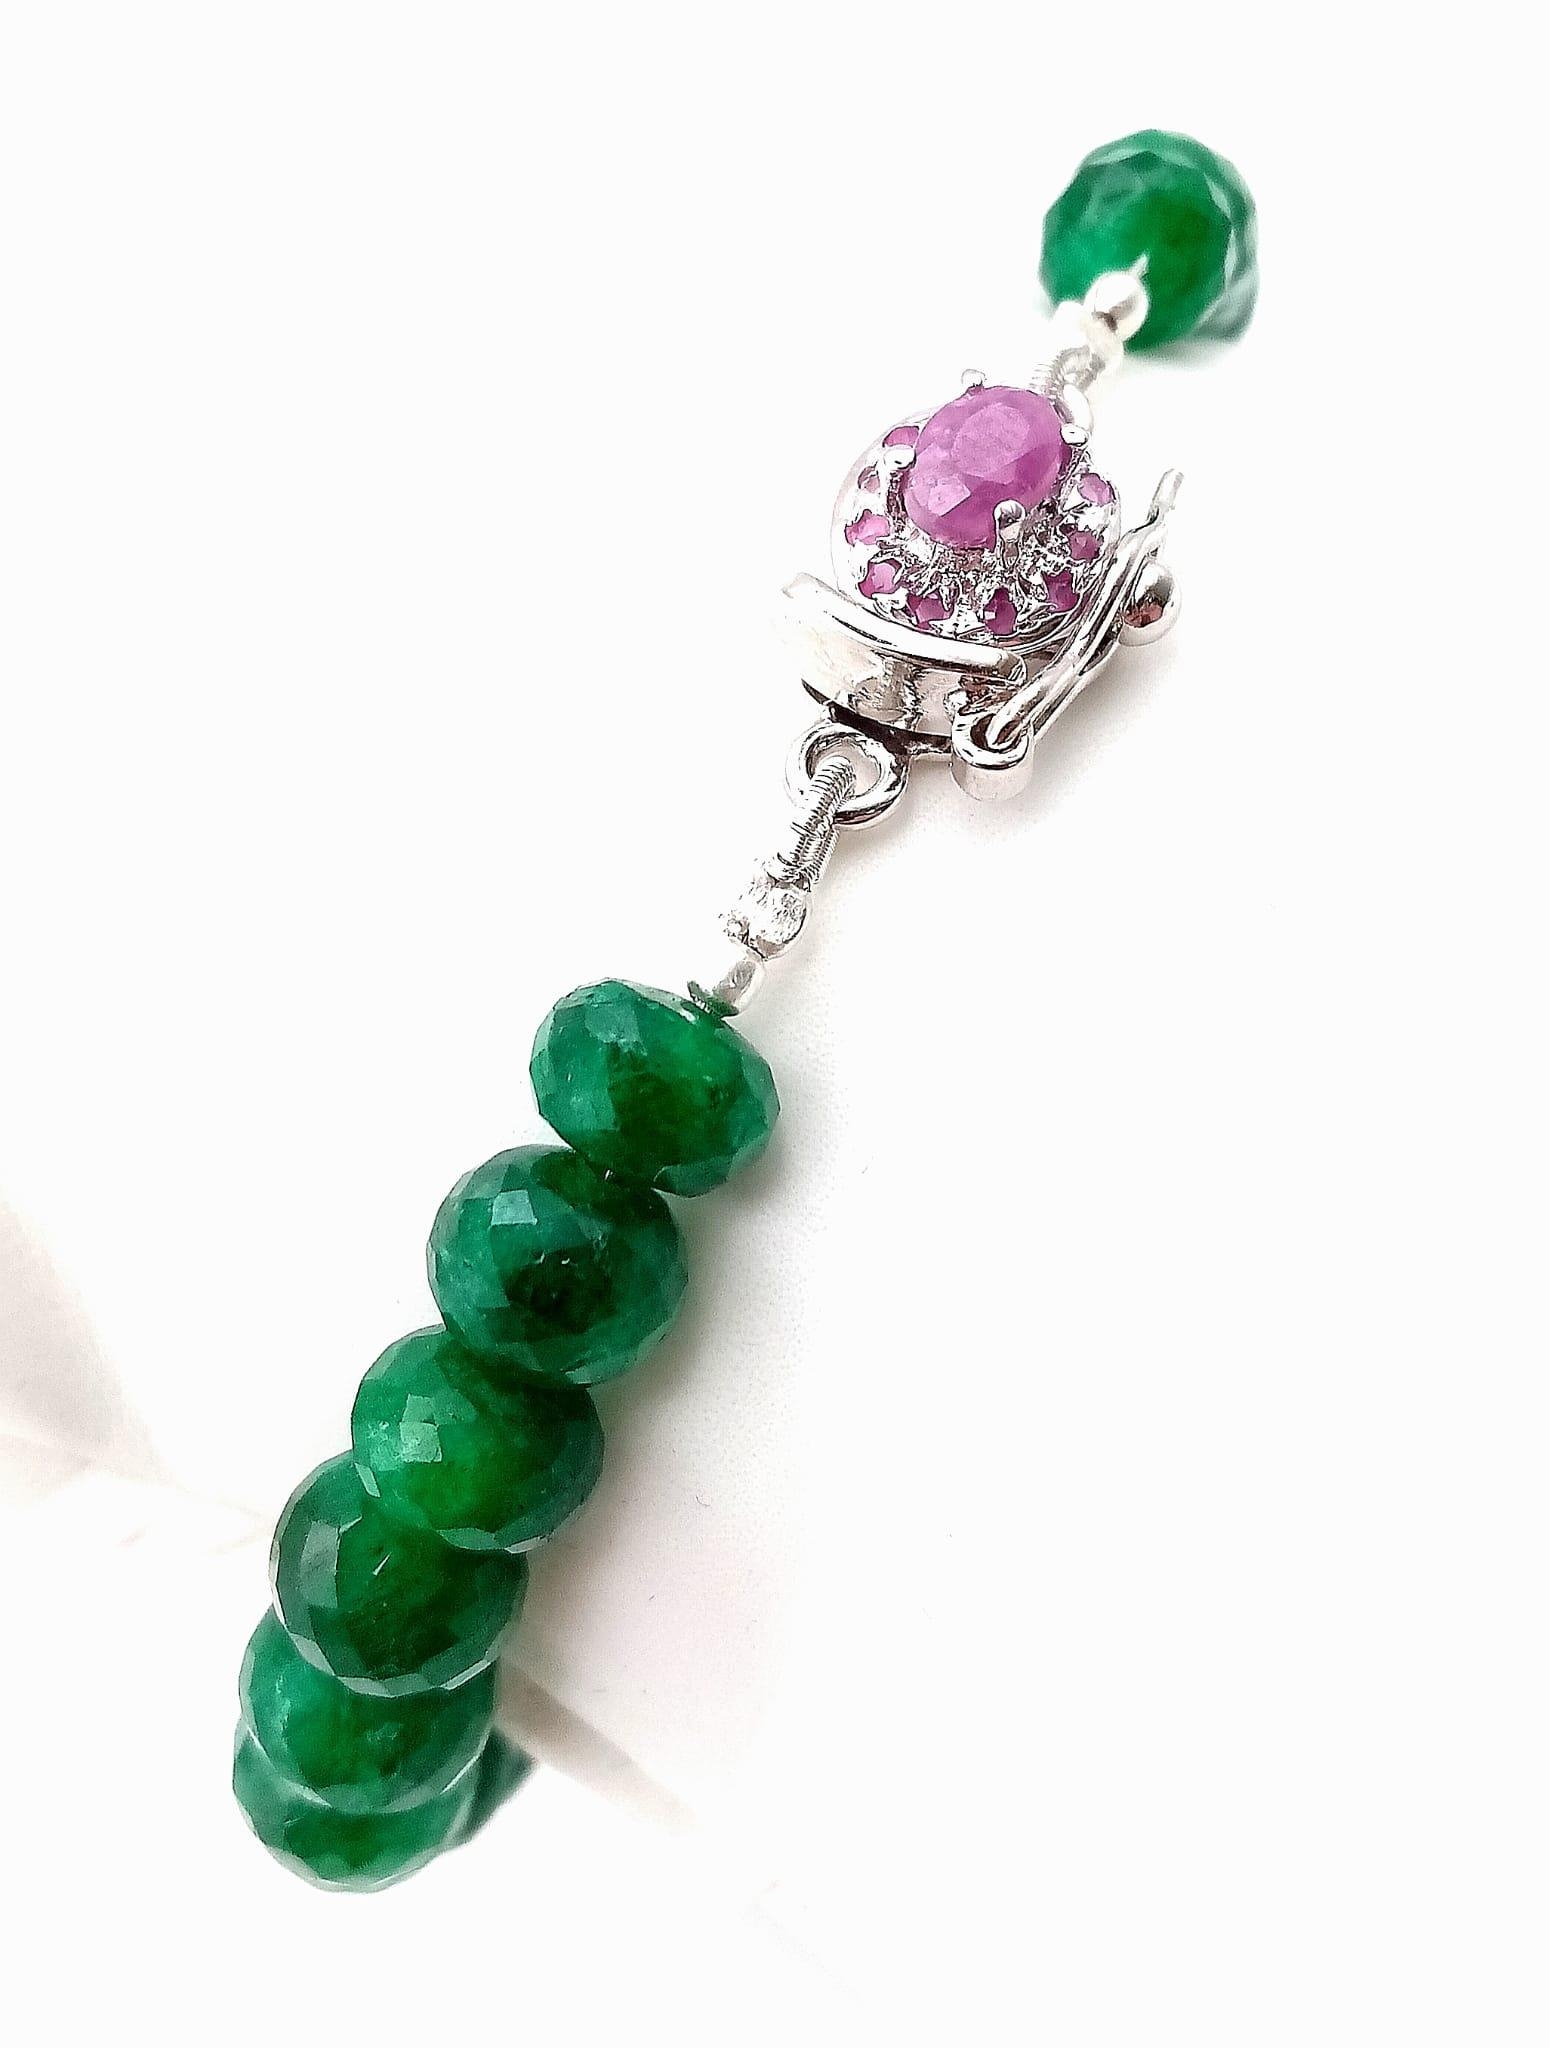 A 120ct Emerald Rondelle Gemstone Bracelet with a 925 Silver Ruby Clasp. 17cm. - Image 2 of 5